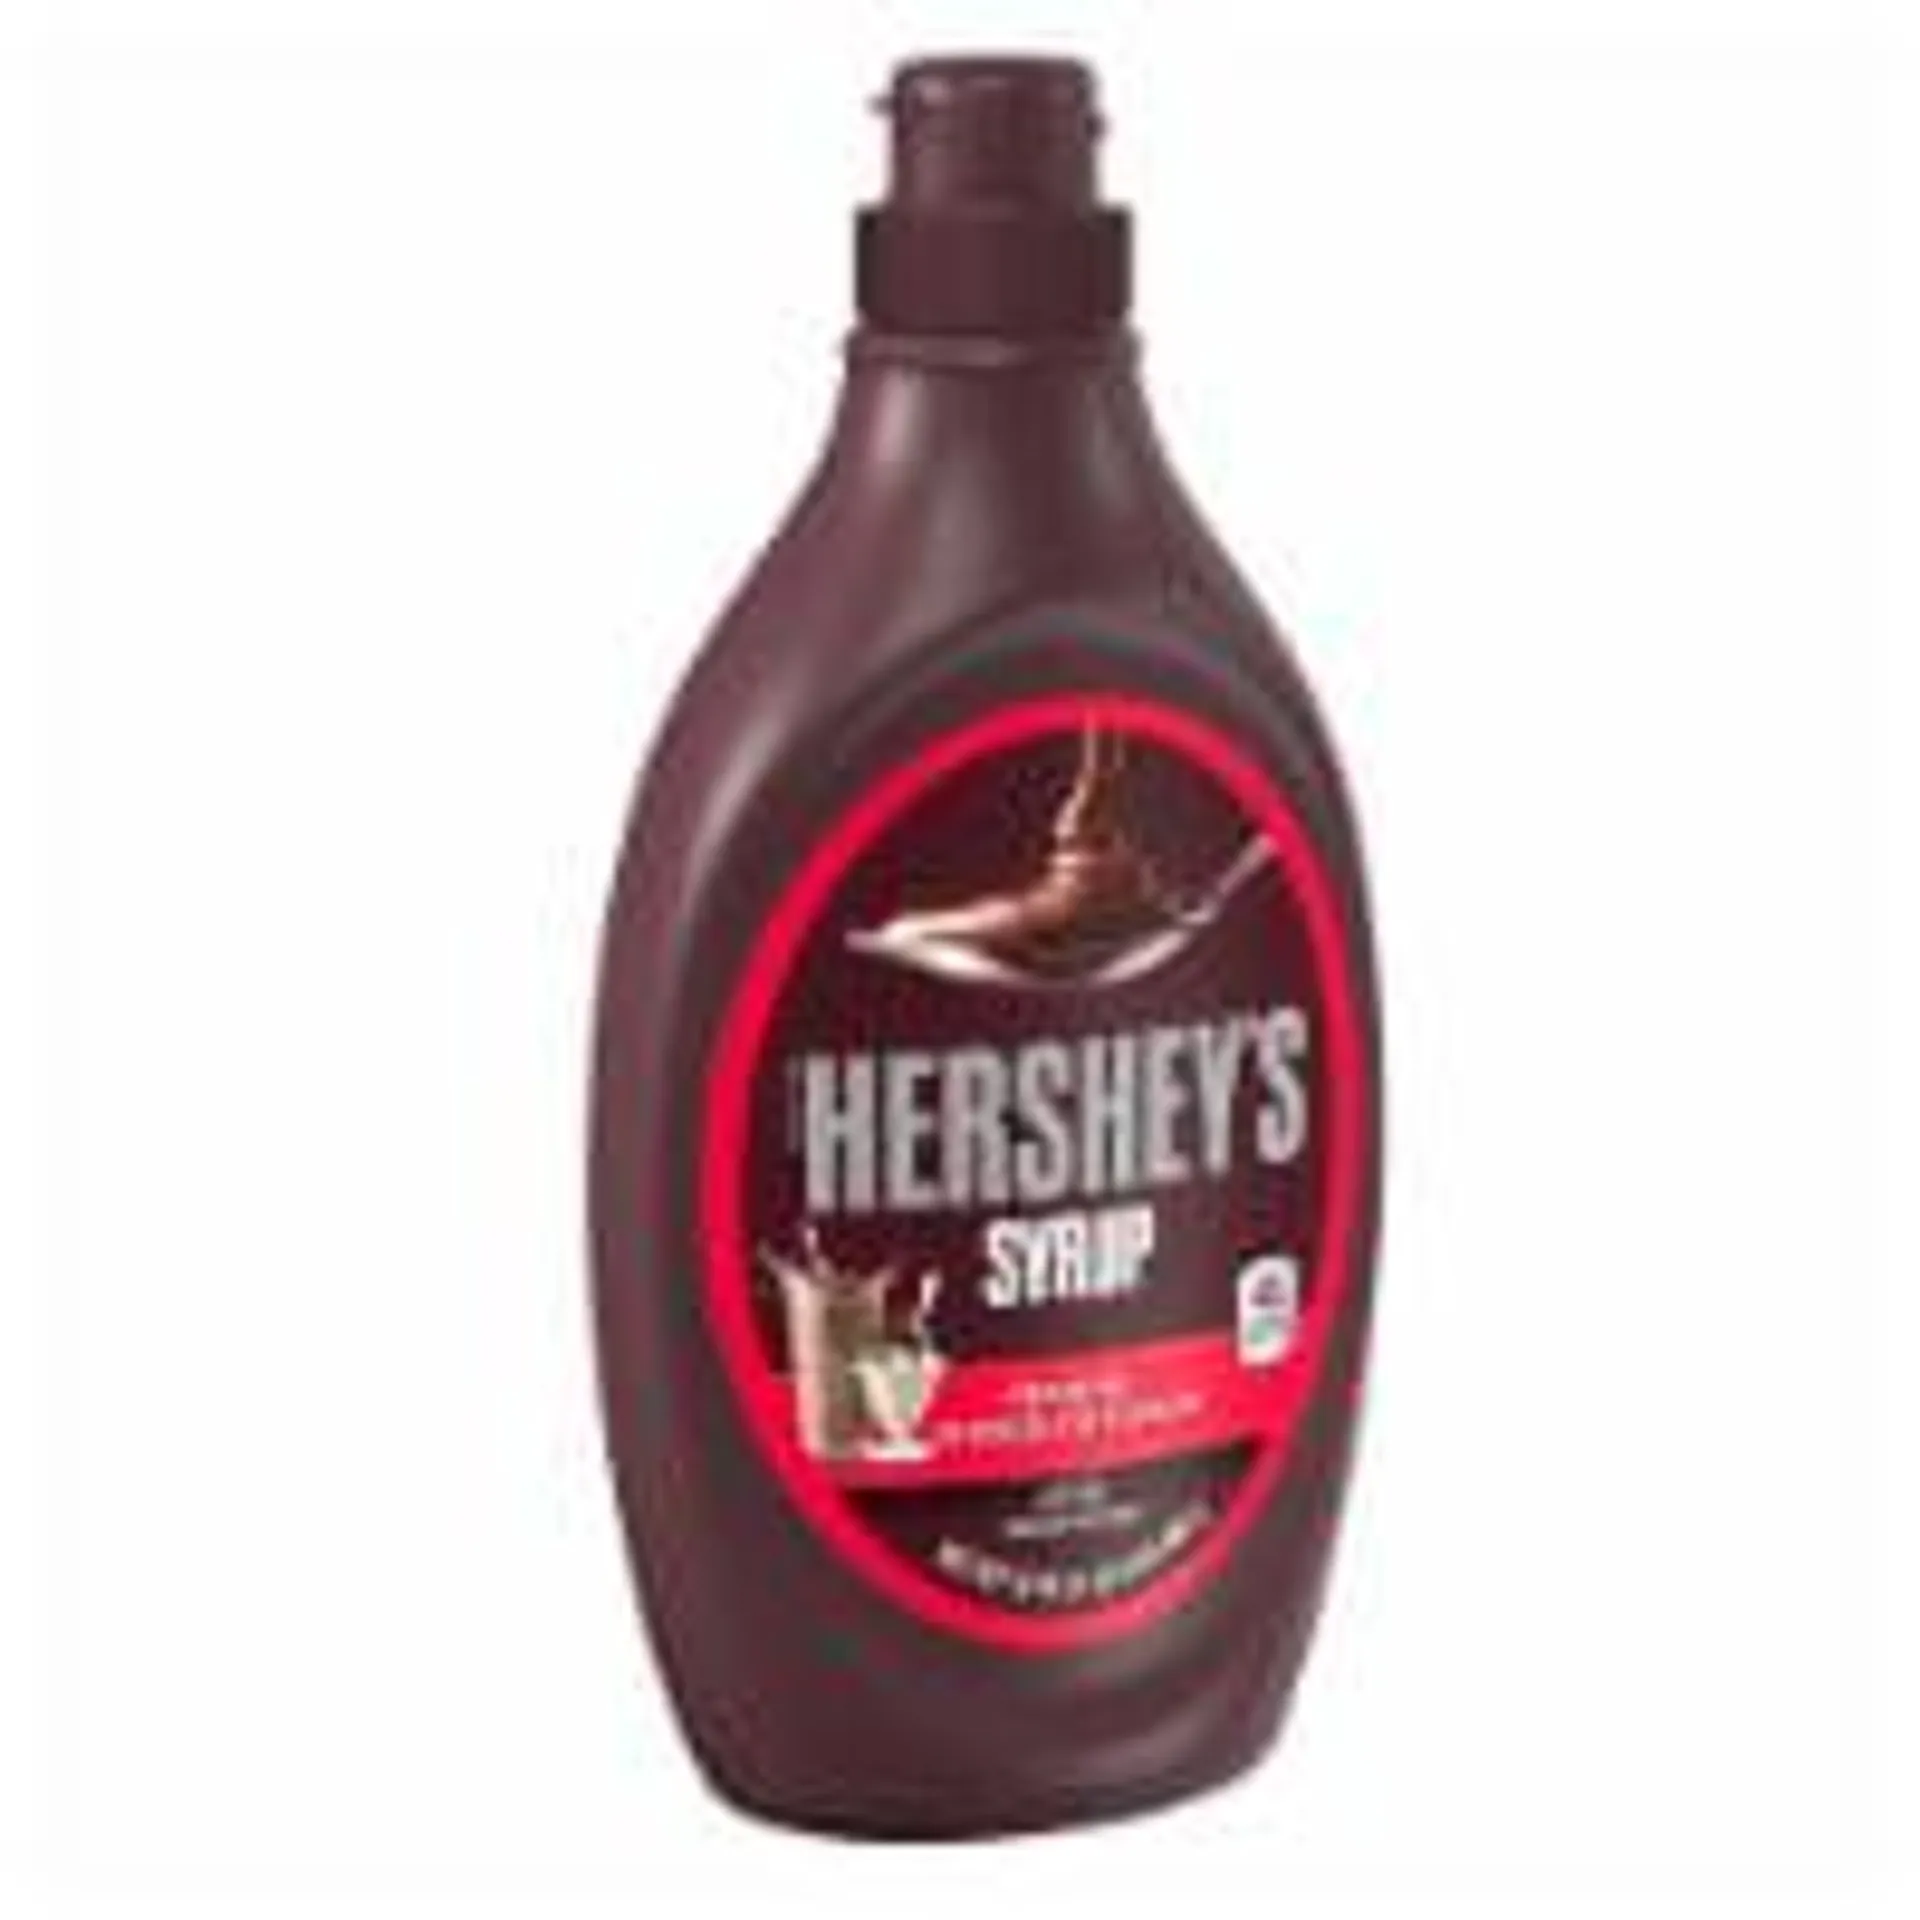 HERSHEY'S Chocolate Syrup Bottle